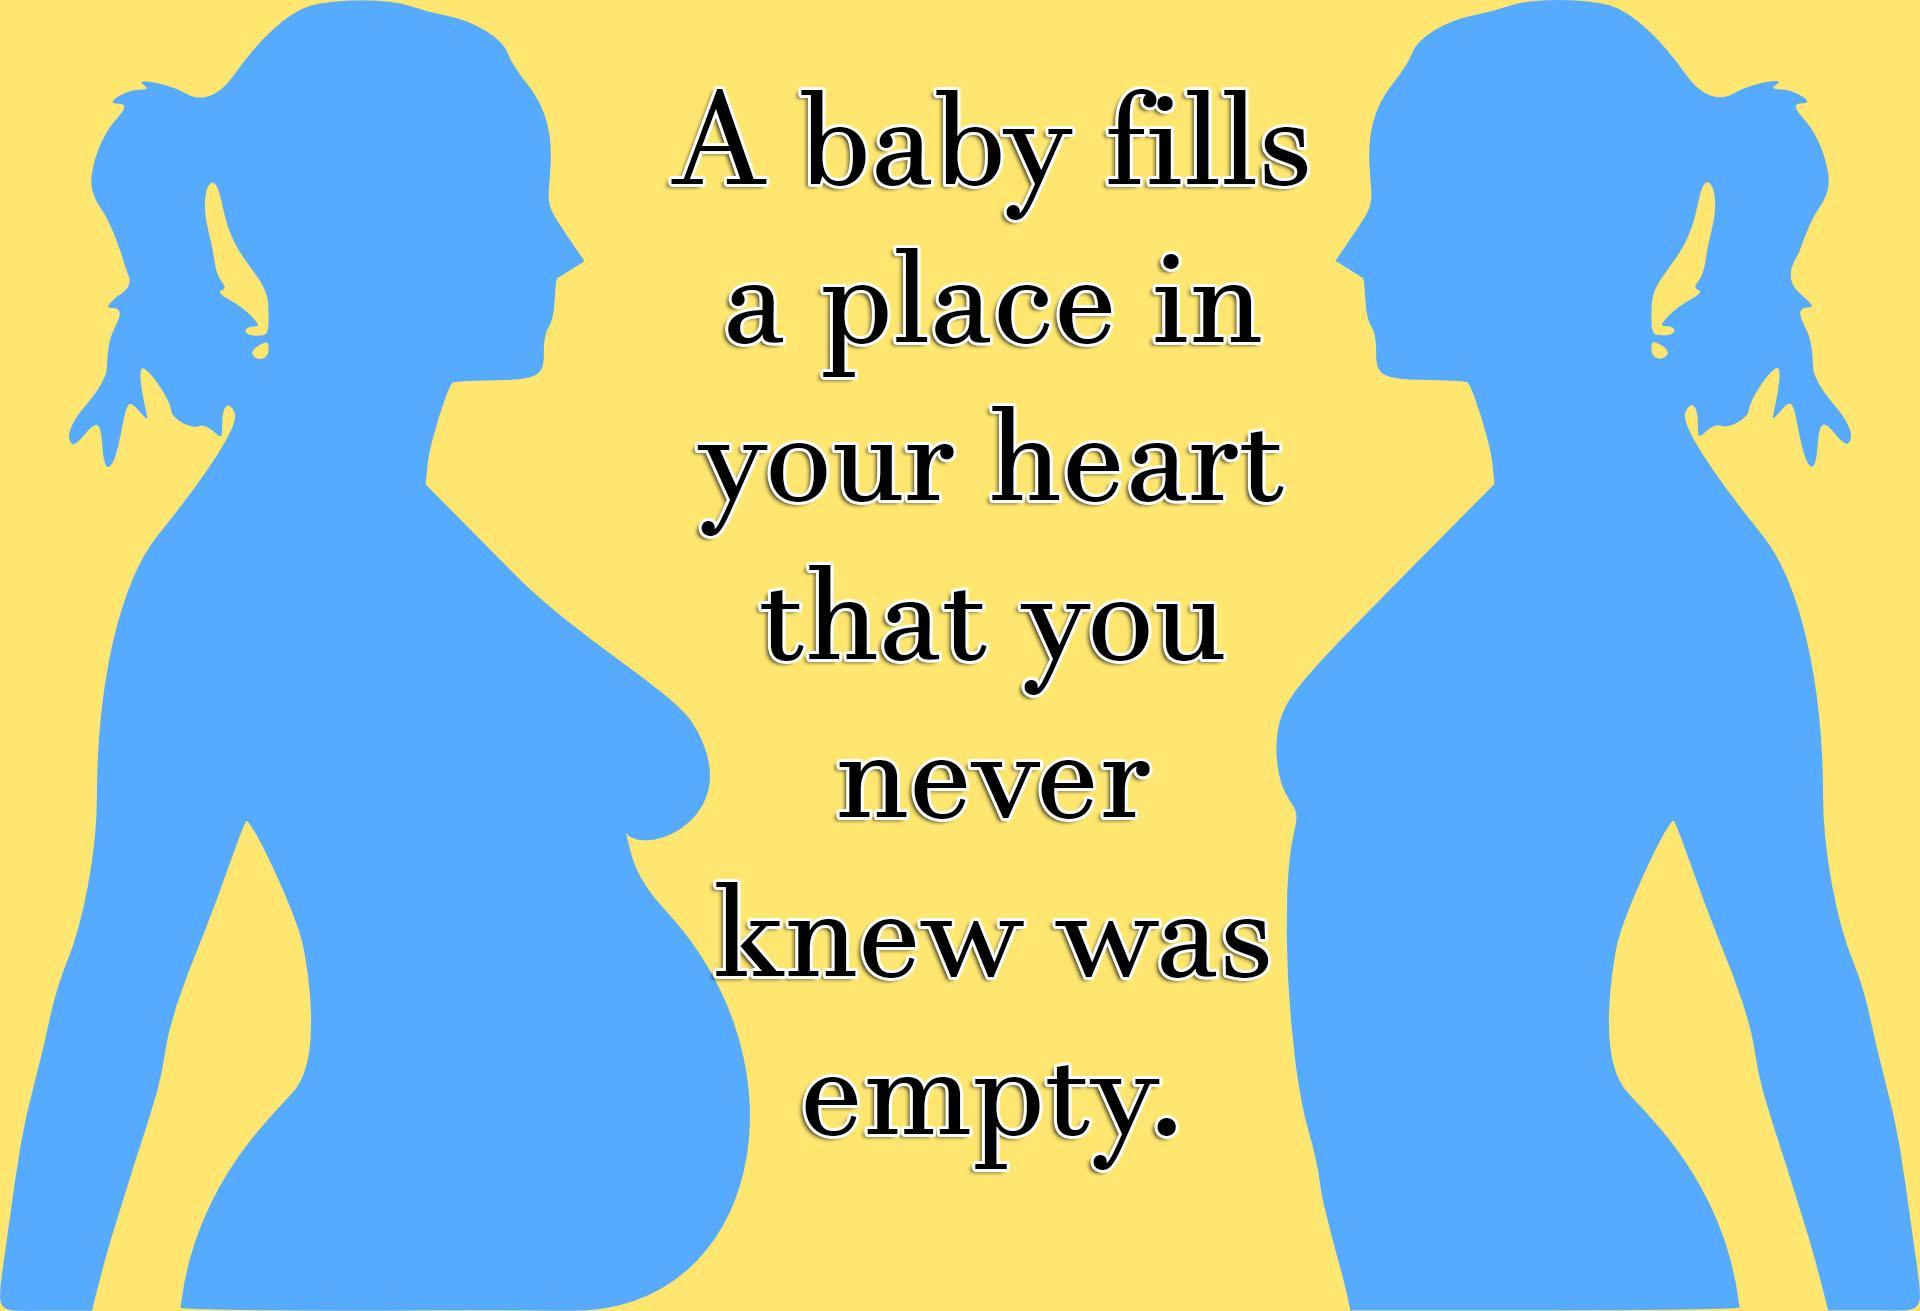 Inspirational Pregnancy Quotes for Android - APK Download